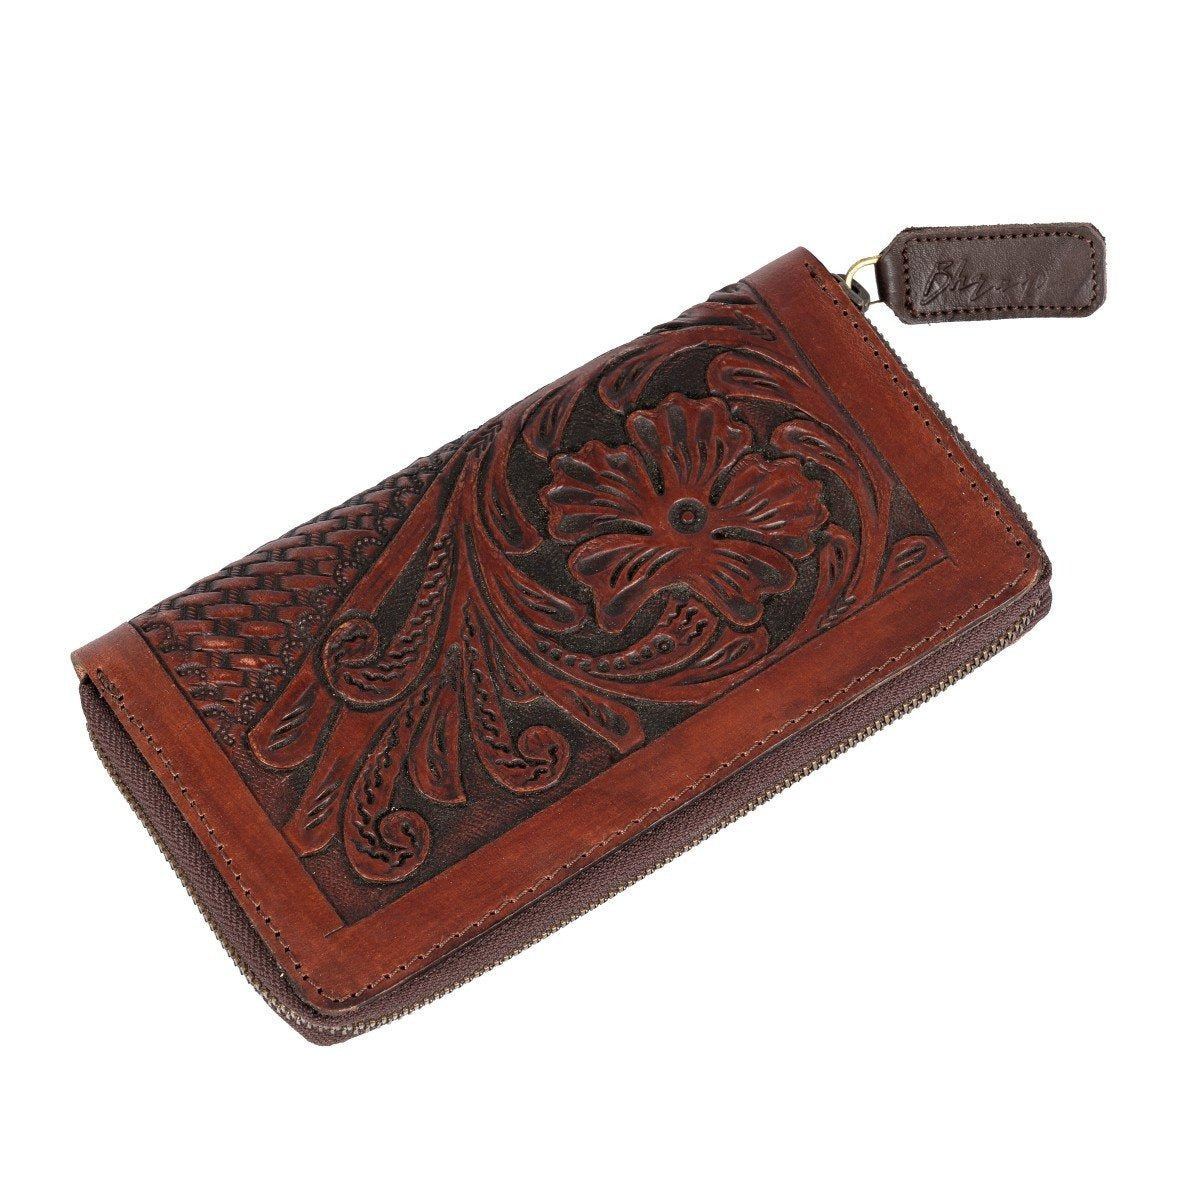 Rowdy Crowd Carved Leather Wallet